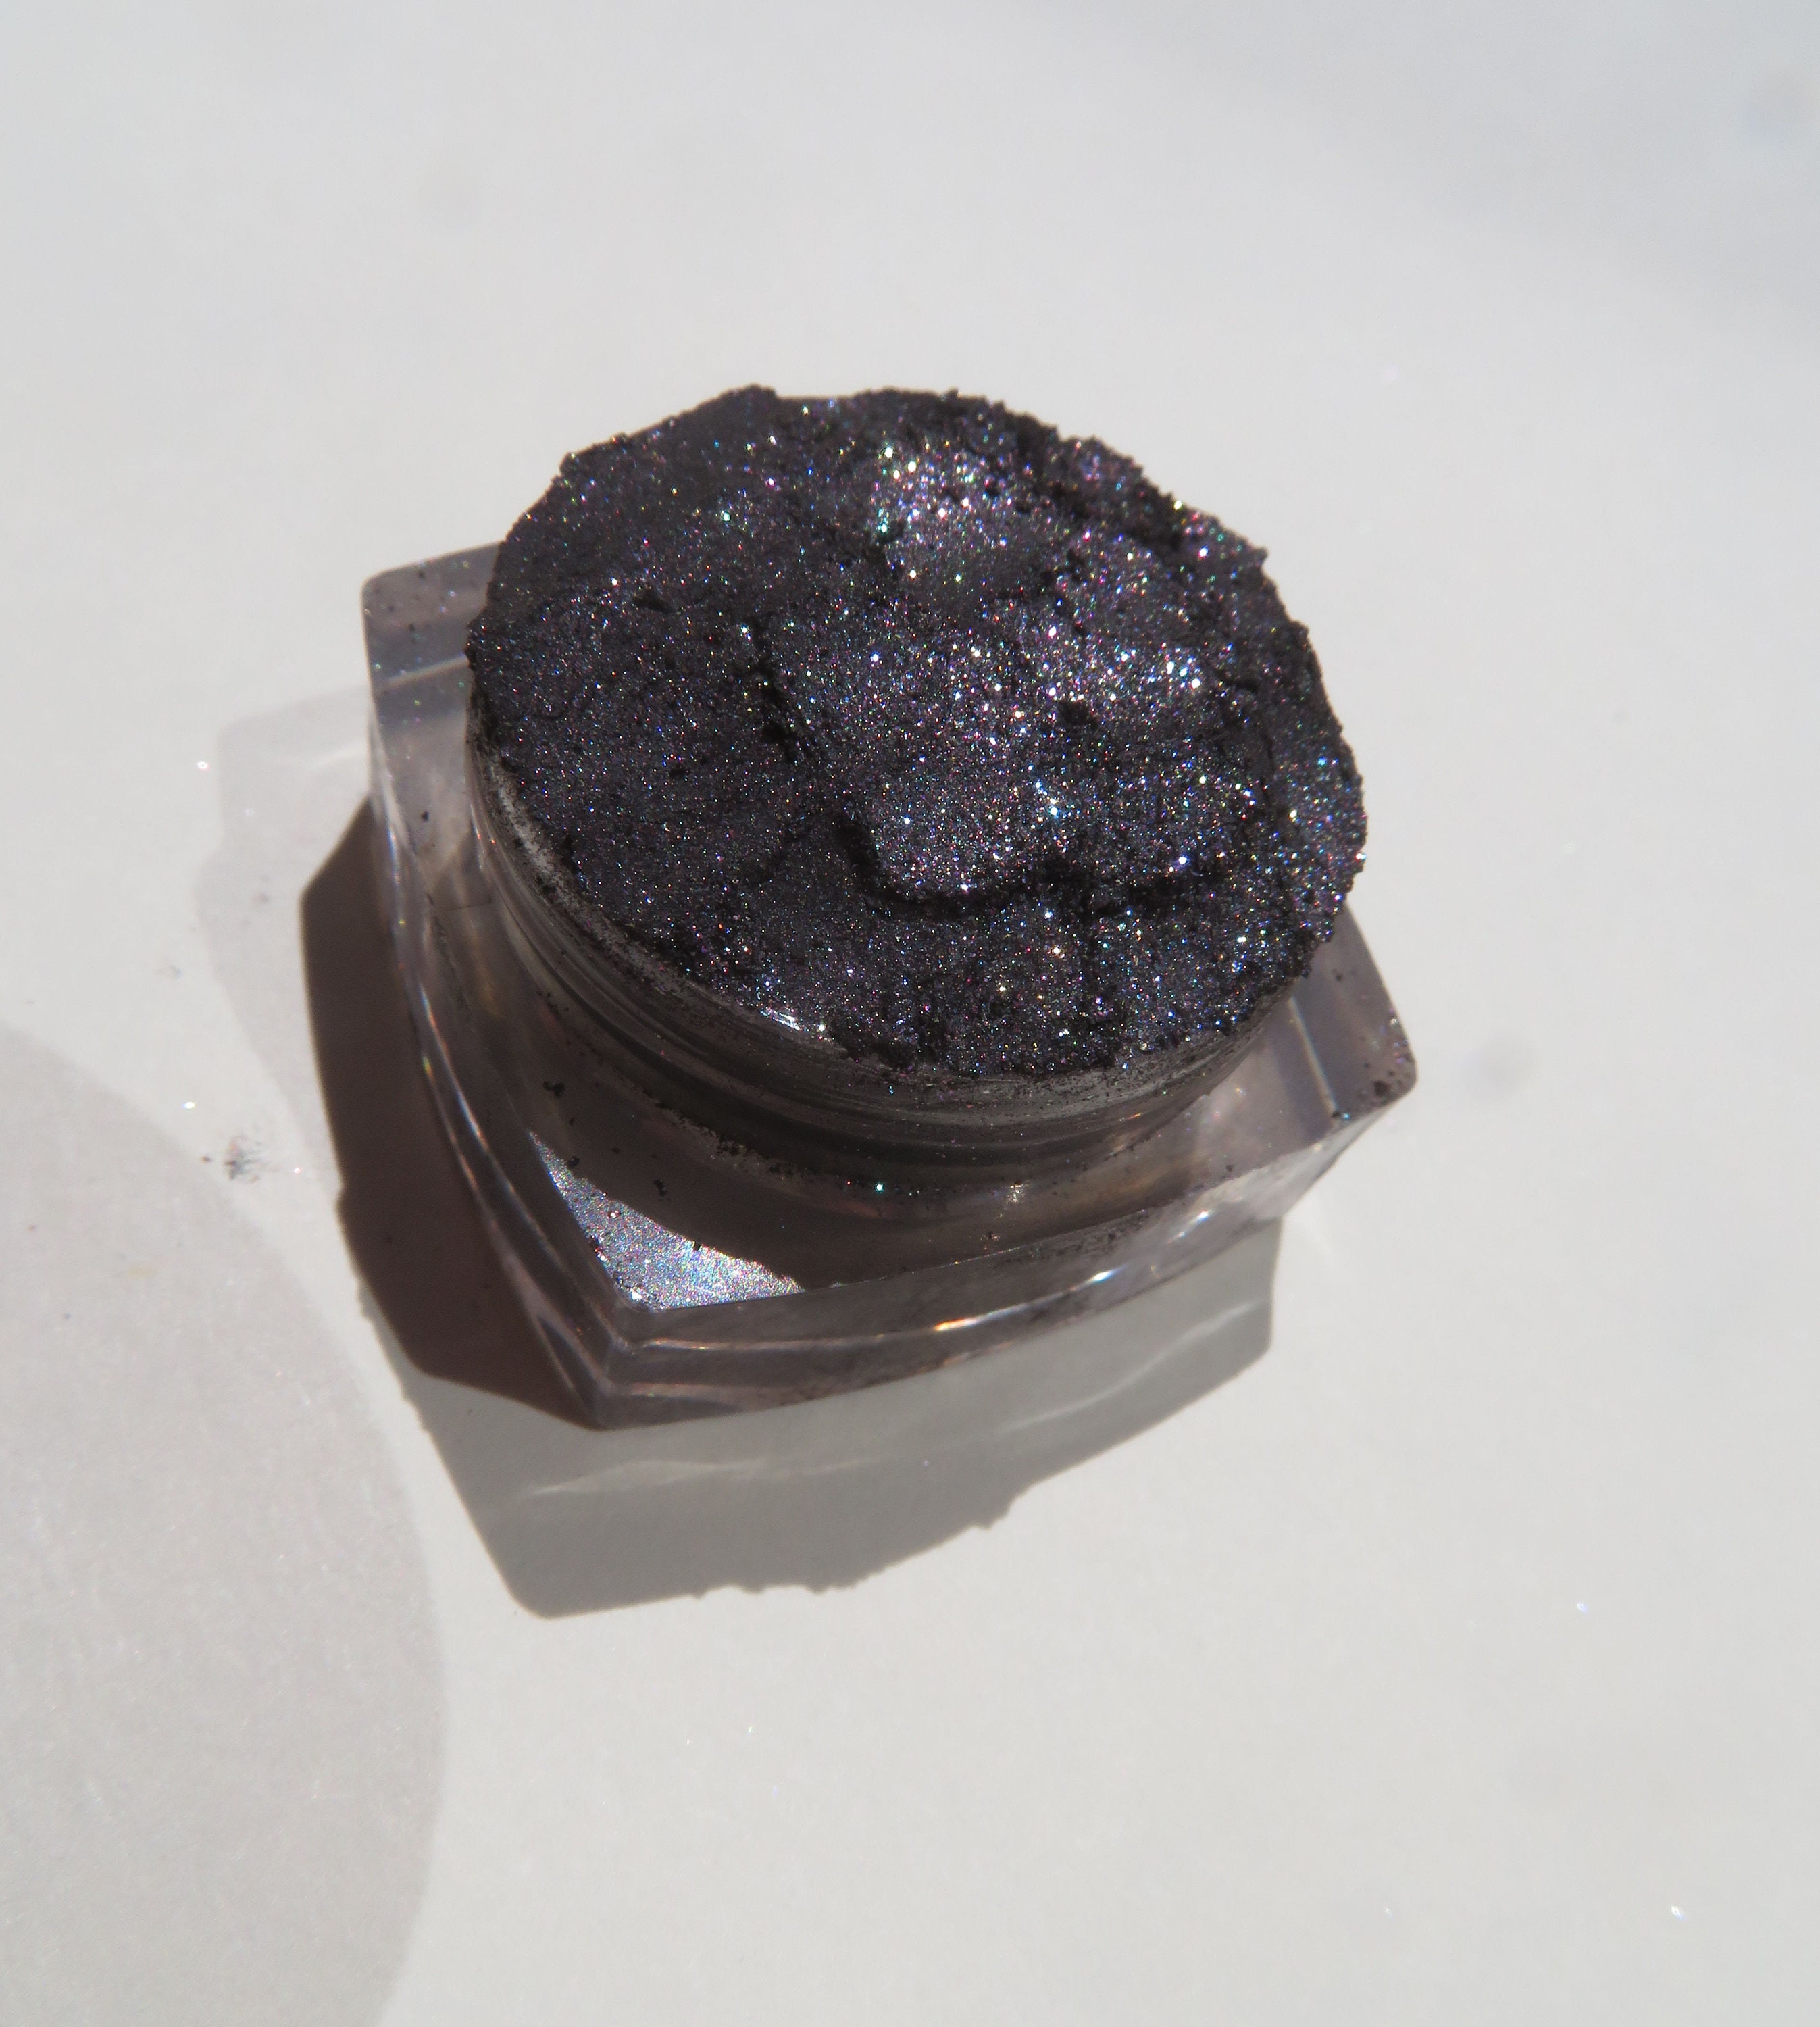 WICKED Black Glitter Line All Natural Loose Eye Shadow Pigment 2g Shimmer  Finish Gluten & Chemical Free Cosmetics by Ultimo Minerals 